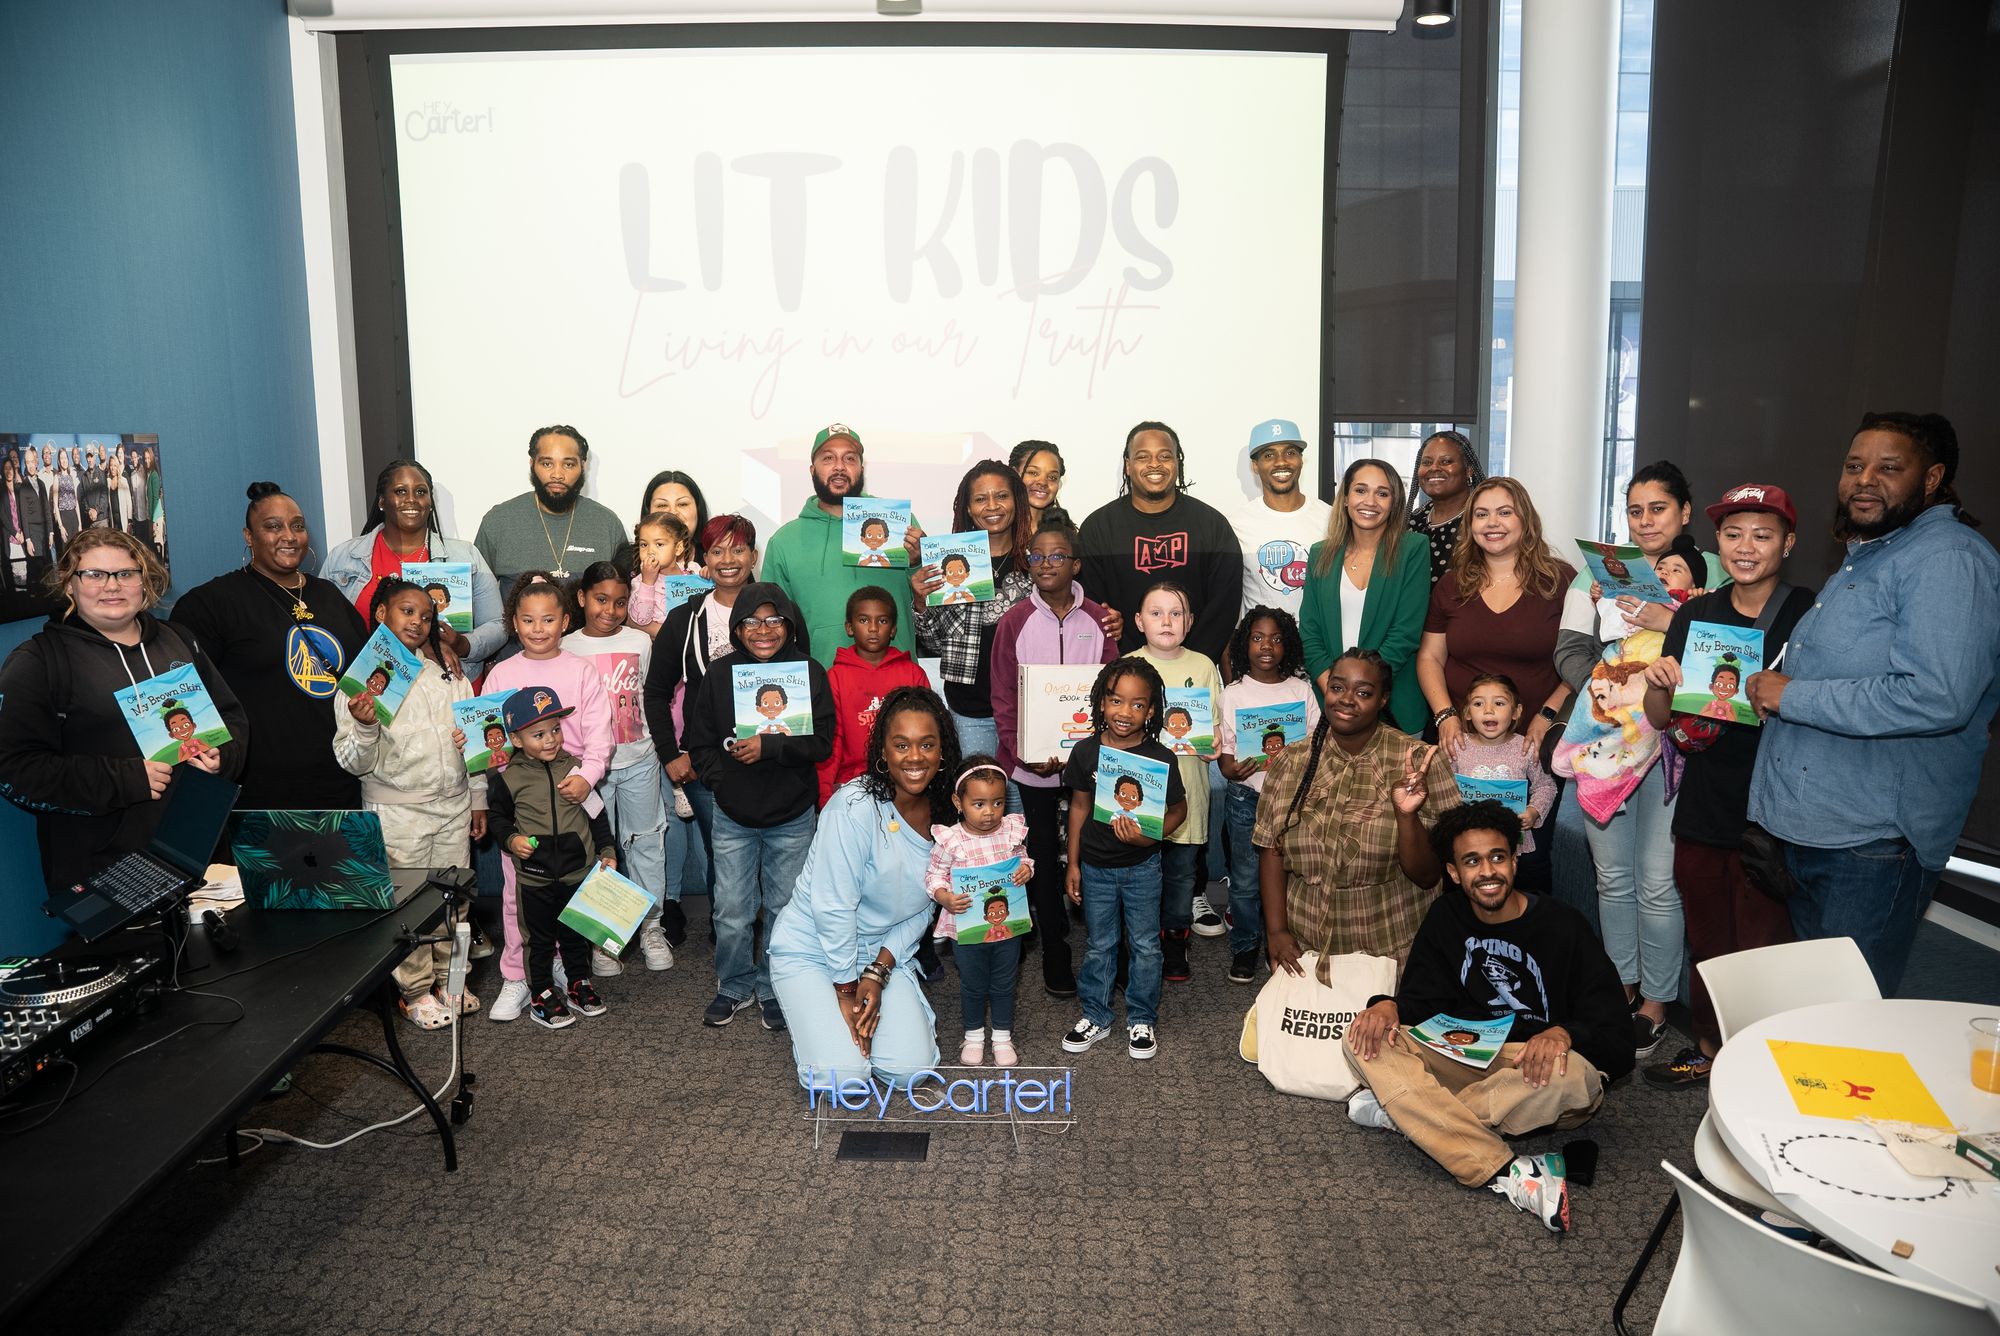 LIT Kids Crew and Families